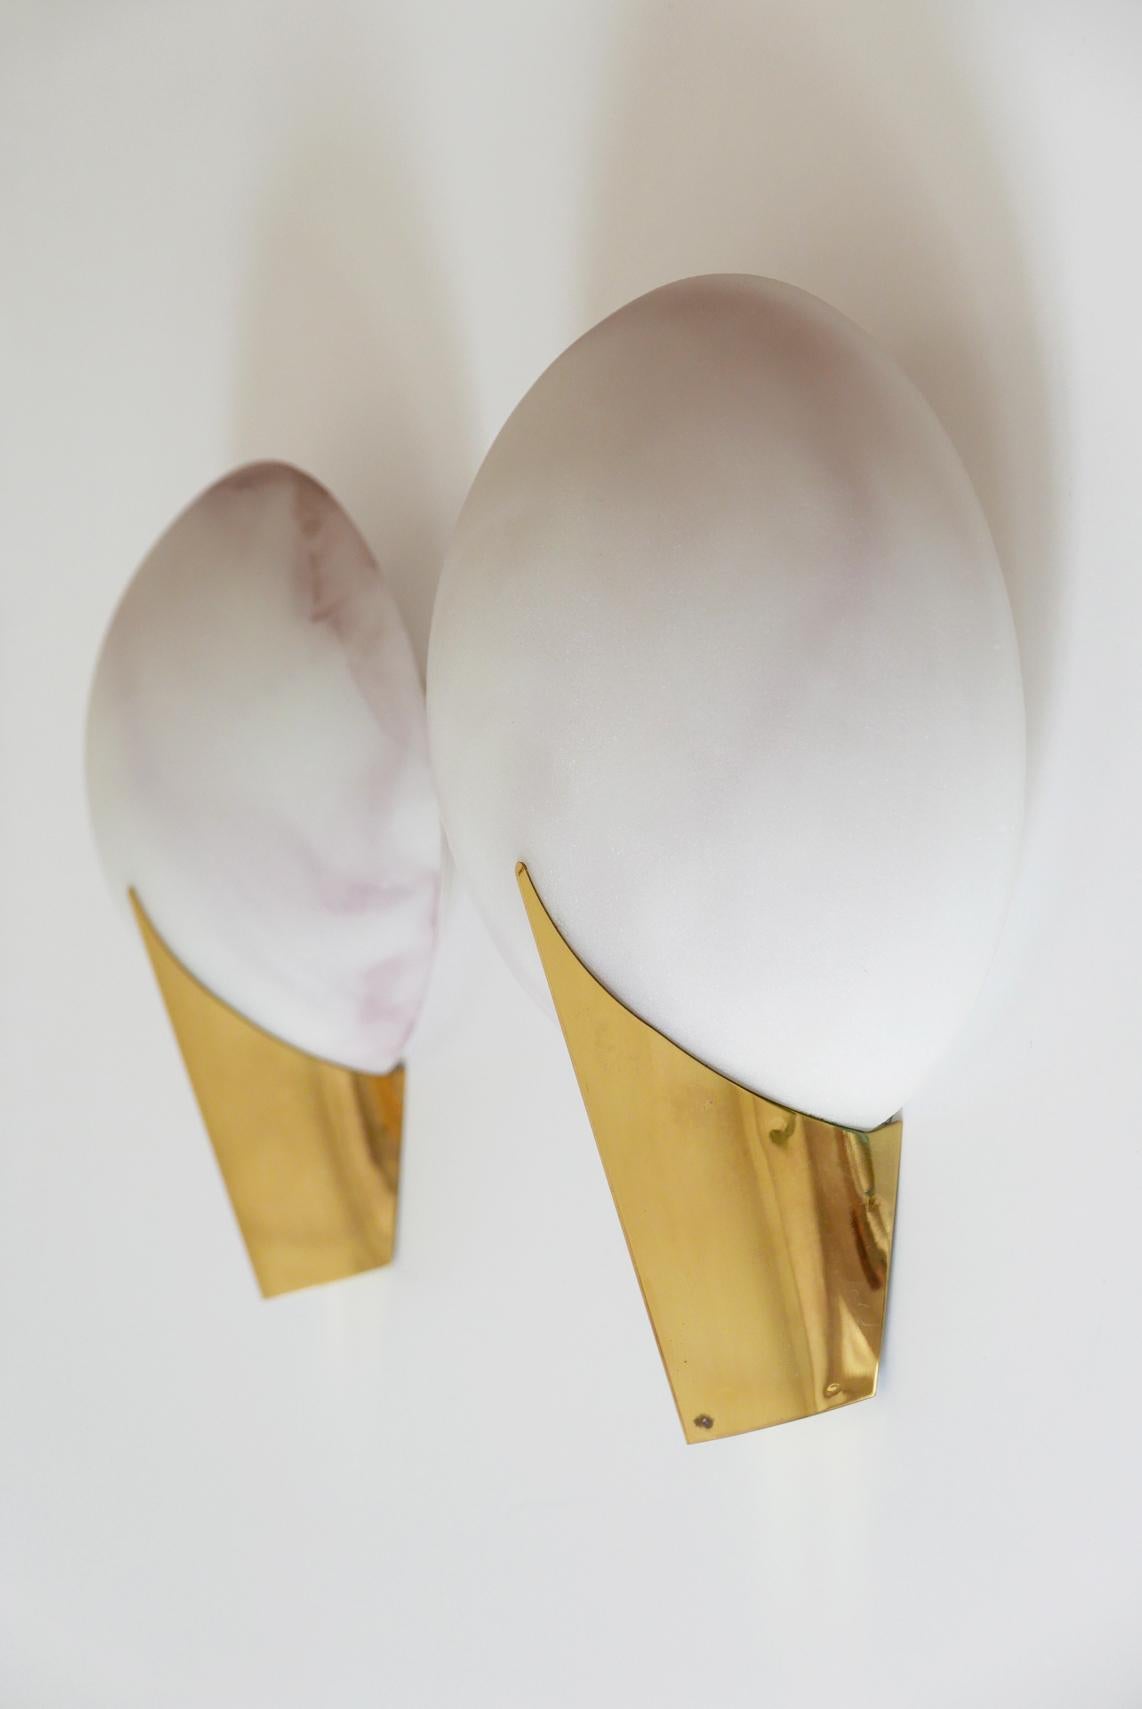 Mid-Century Modern Set of Two Elegant Modernist Wall Lamps or Sconces by J.T. Kalmar, 1980s Austria For Sale